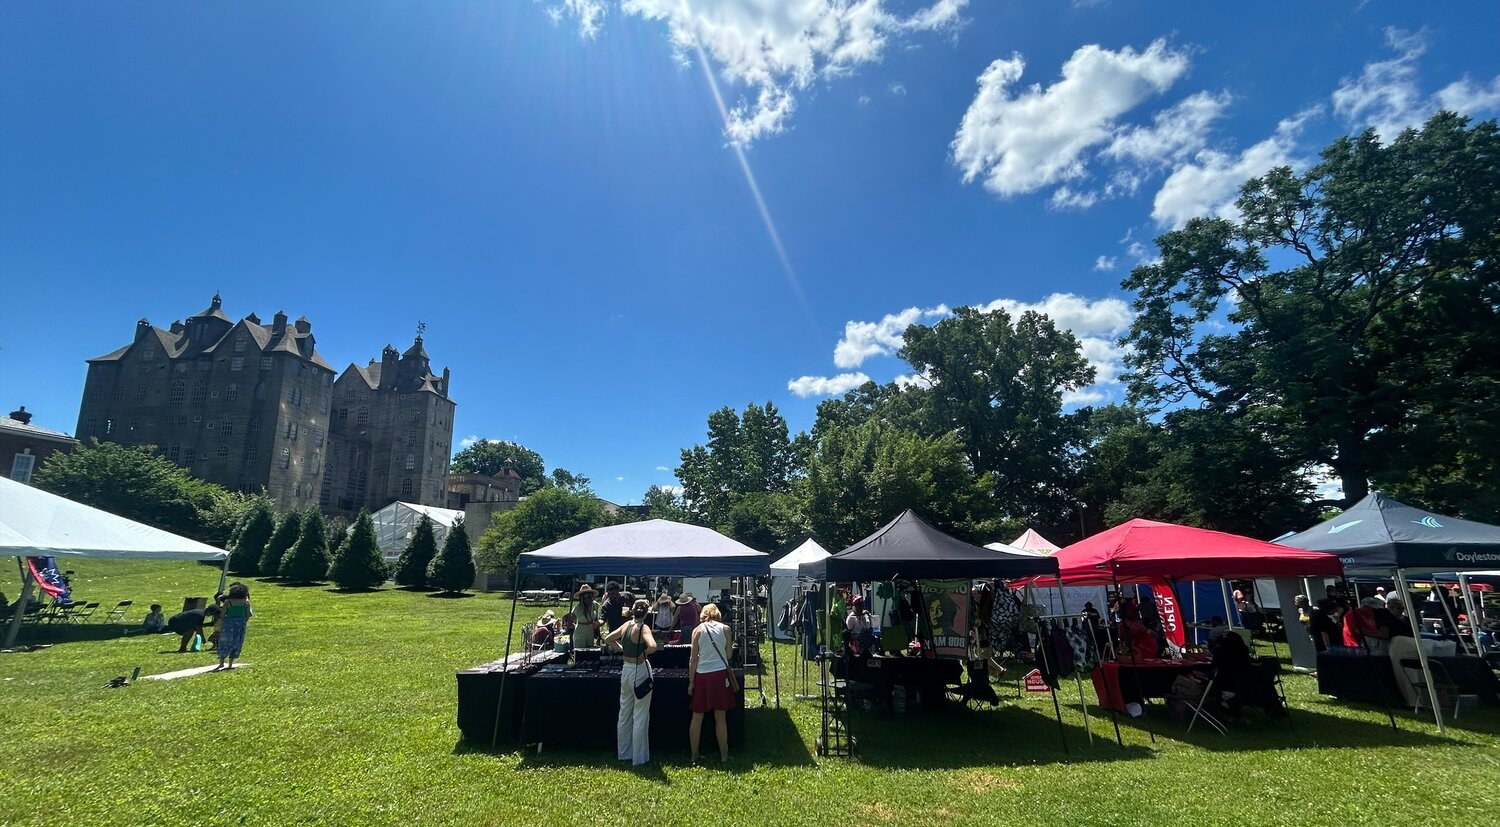 Vendors participating in the annual Juneteenth Celebration in Doylestown set up shop on the lawn of the Mercer Museum.